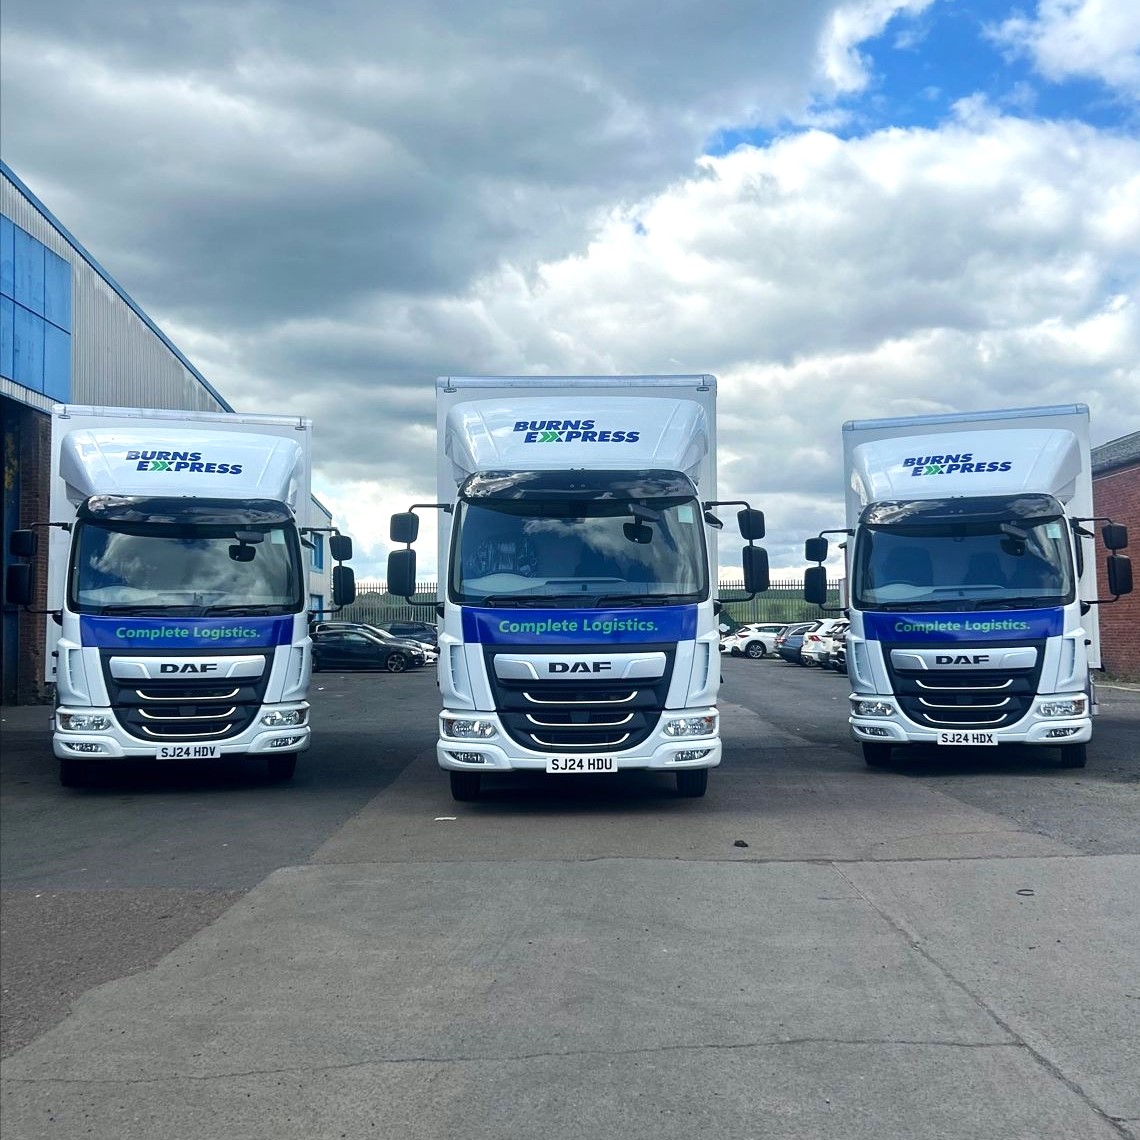 Brightening this bank holiday with these 3 new DAF LF 190 7.5T trucks, now with Burns Express Freight Ltd, based in Glasgow, from their local @MotusDAF dealership. ✨ @DAFTrucksUK #BankHoliday #Glasgow #Scotland #DAFTrucks #Trucks #MotusCommercials